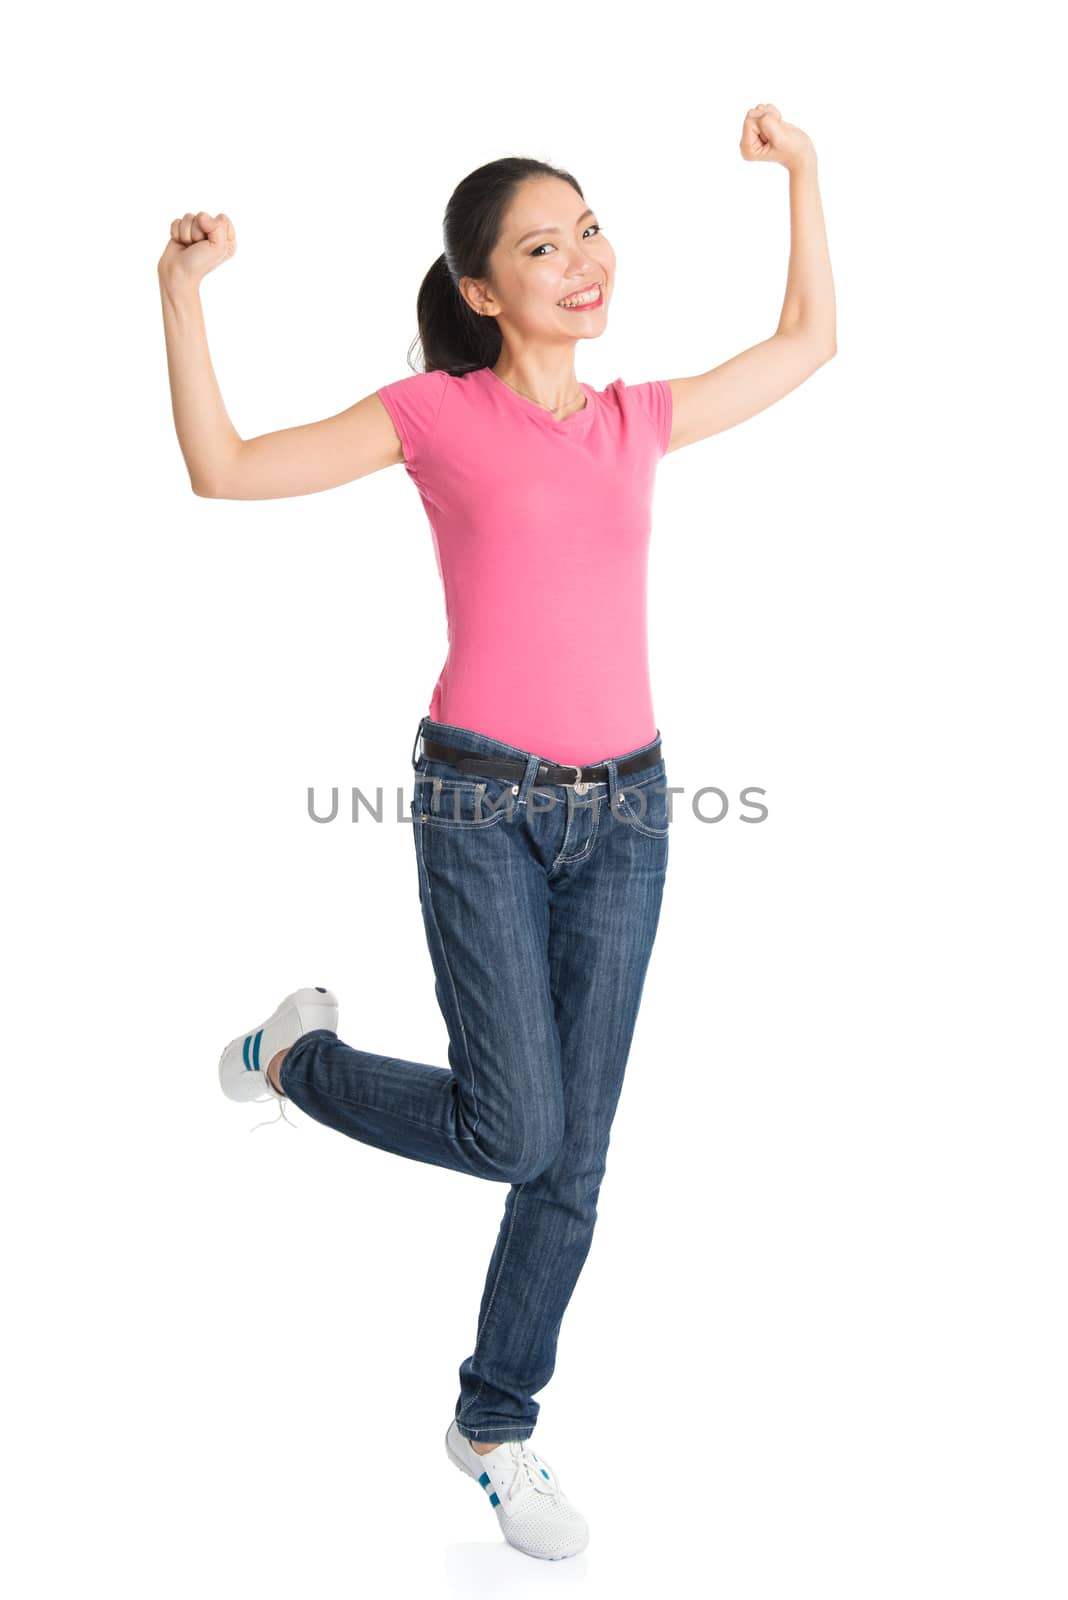 Portrait of excited young Asian woman in pink shirt and jeans arms raised celebrating success, full body standing isolated on white background.